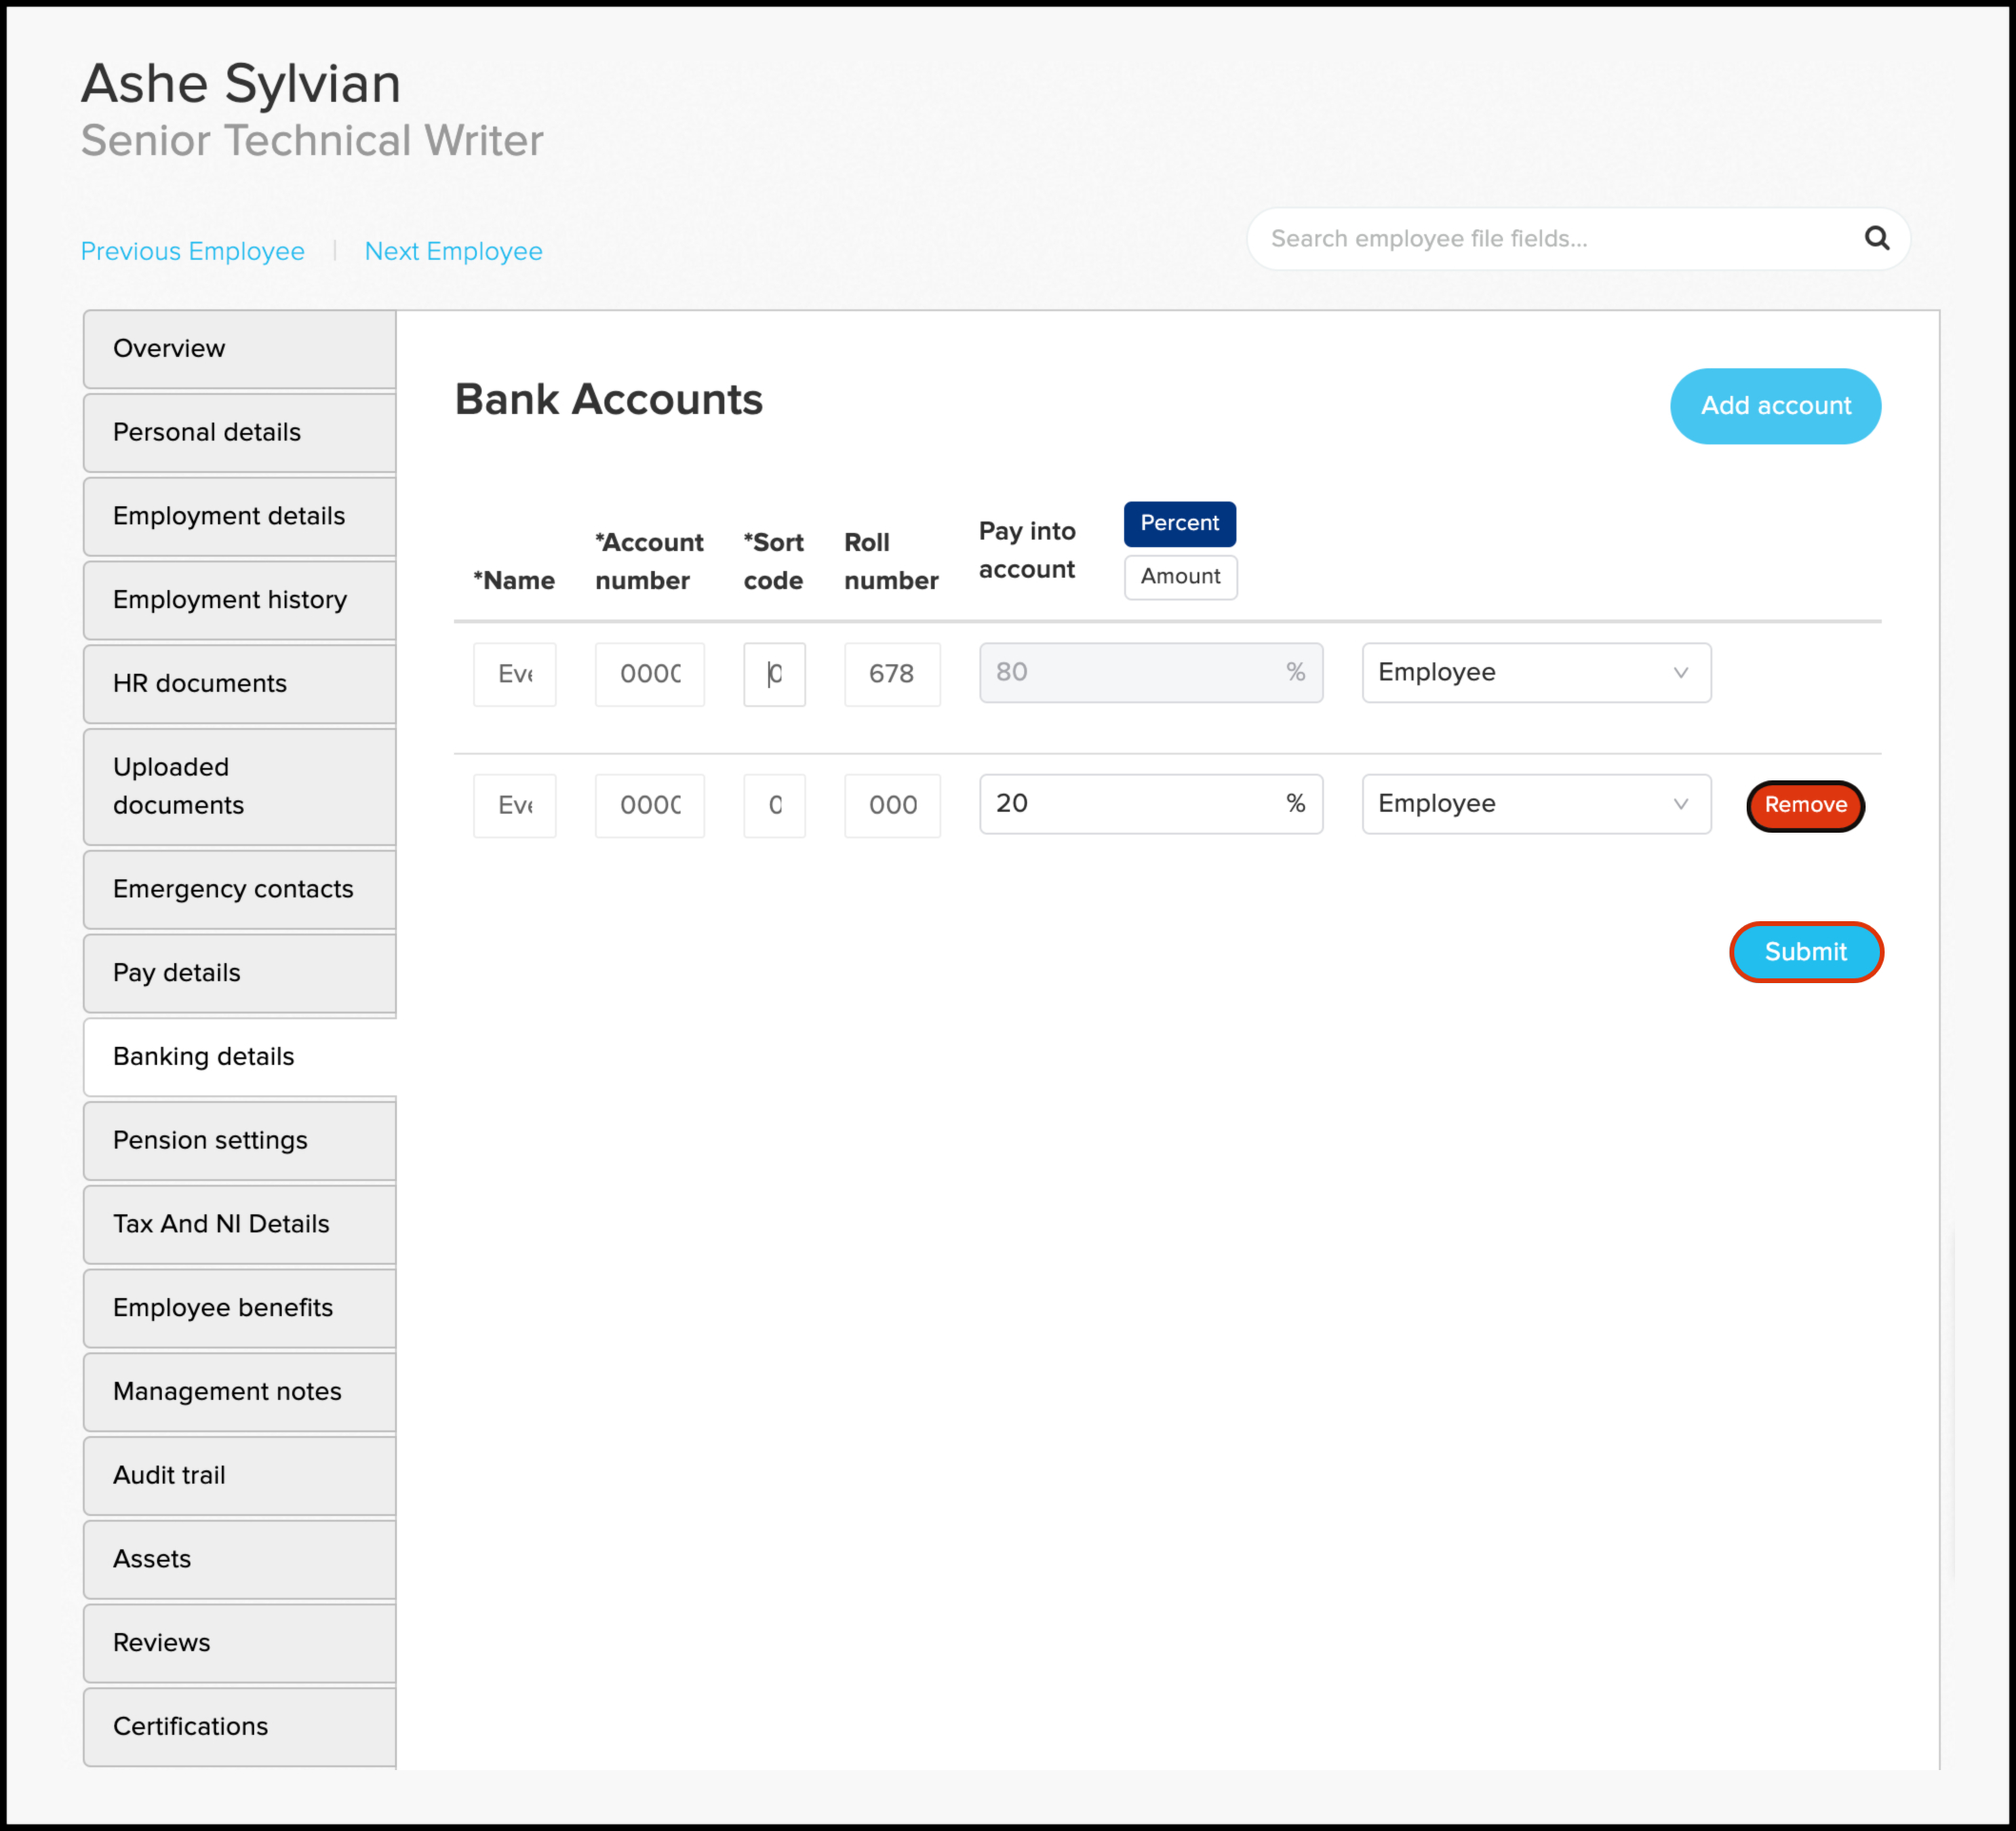 screenshot of banking details page for employee ashe sylvian in the main screen module it reads bank accounts, add account, the fields to enter the account options, a remove button next to any saved accounts and then a save button for any changes you may make. the remove and save buttons are highlighted in red